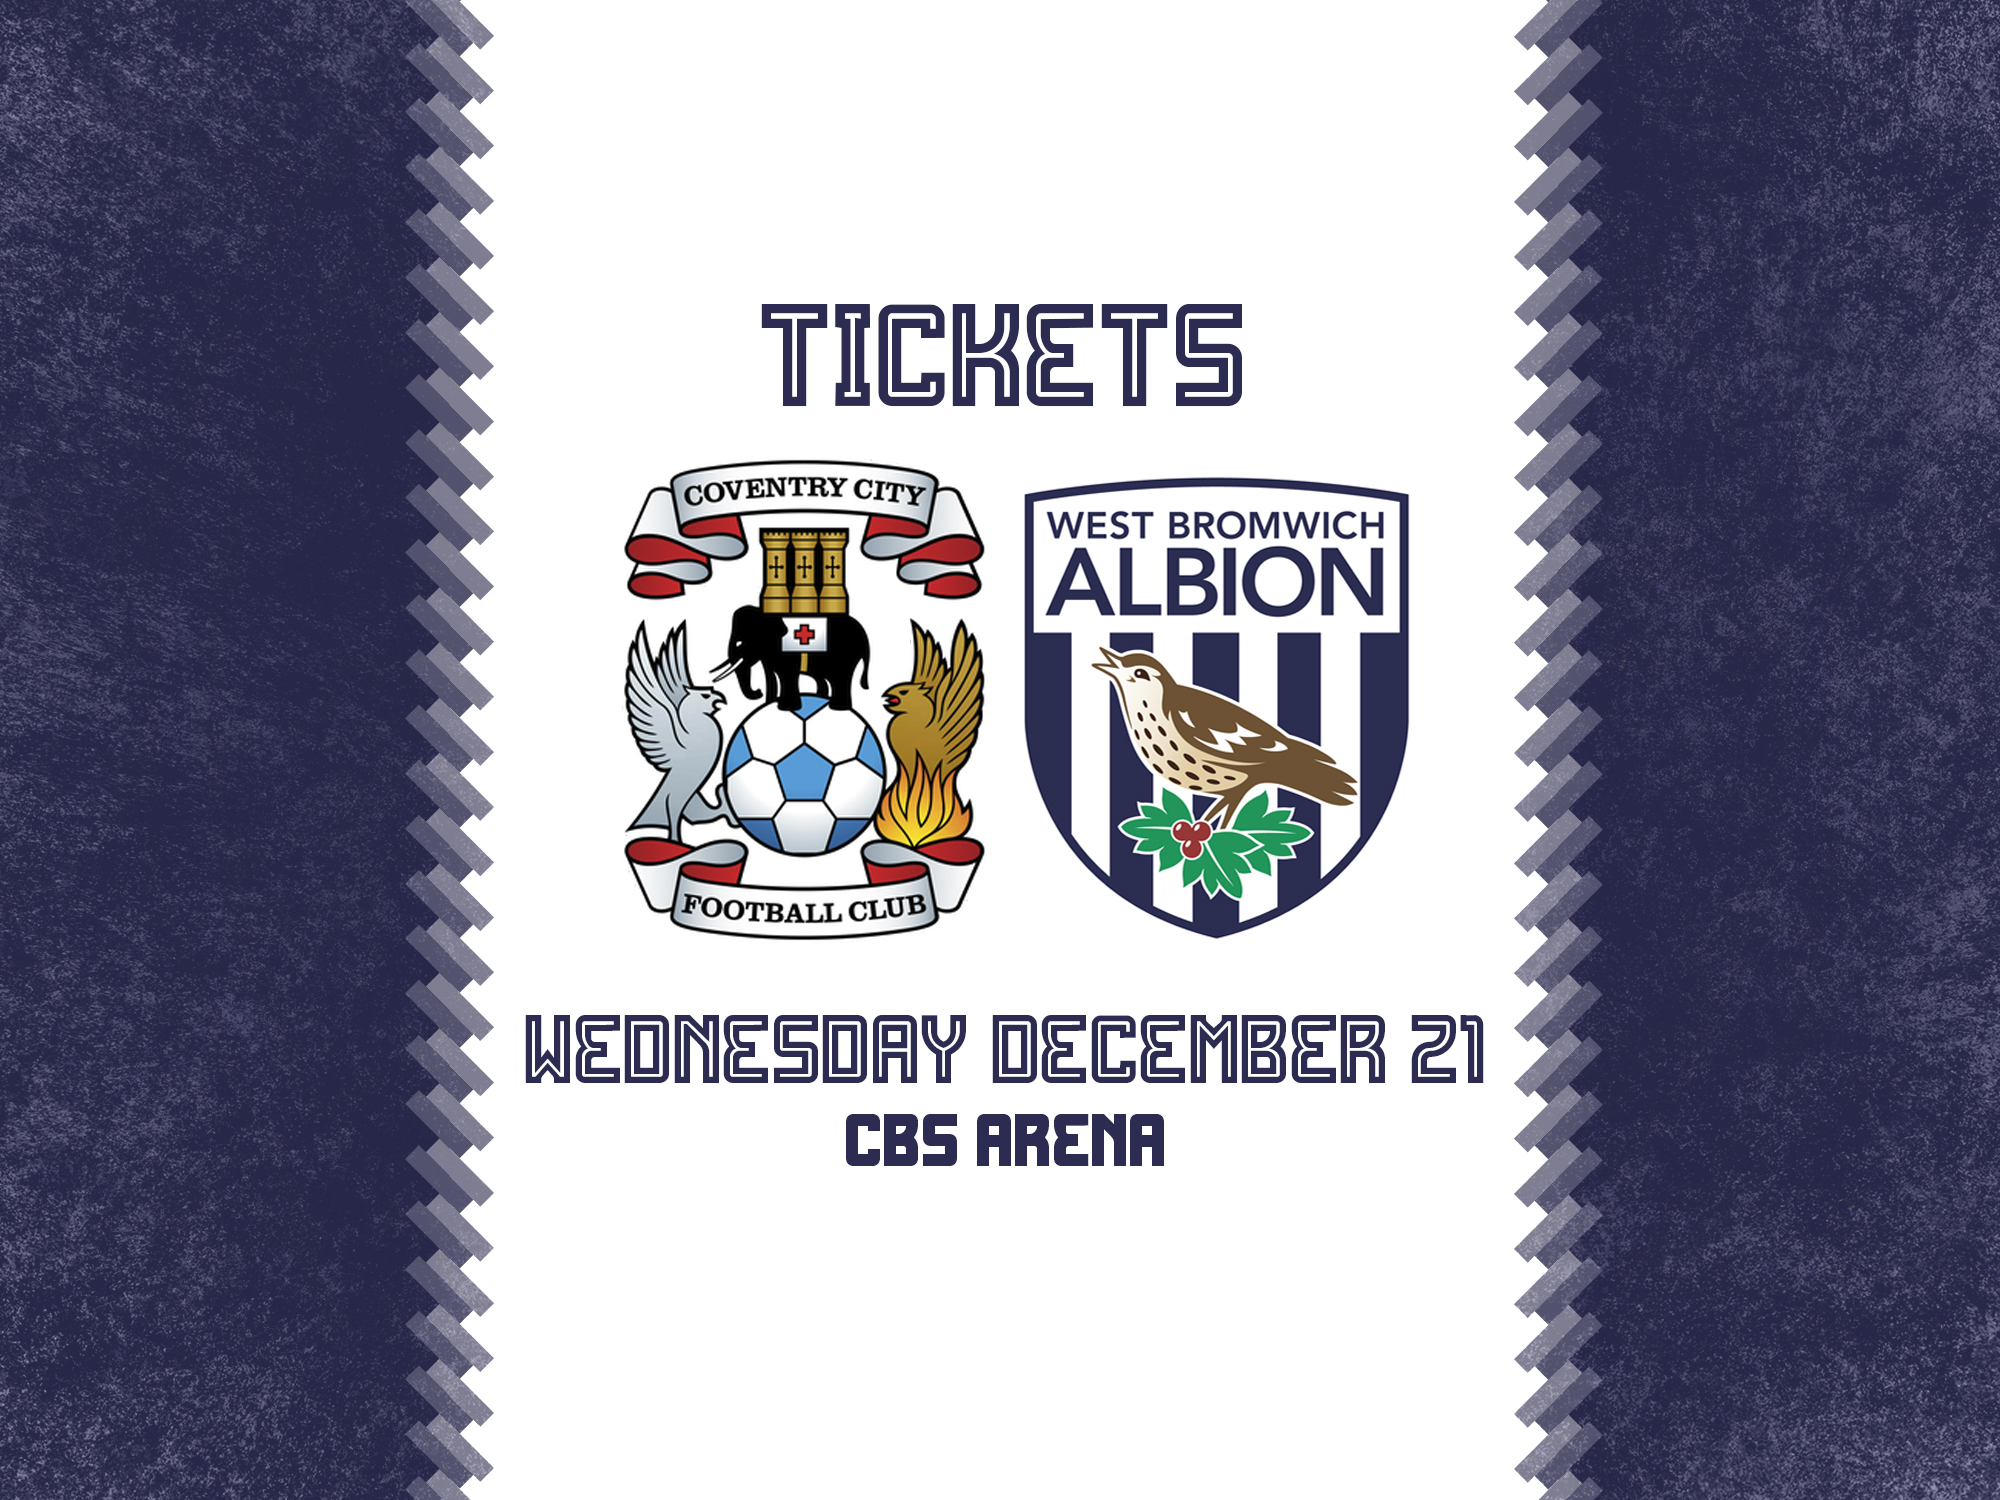 A ticket graphic advertising Albion's match against Coventry City